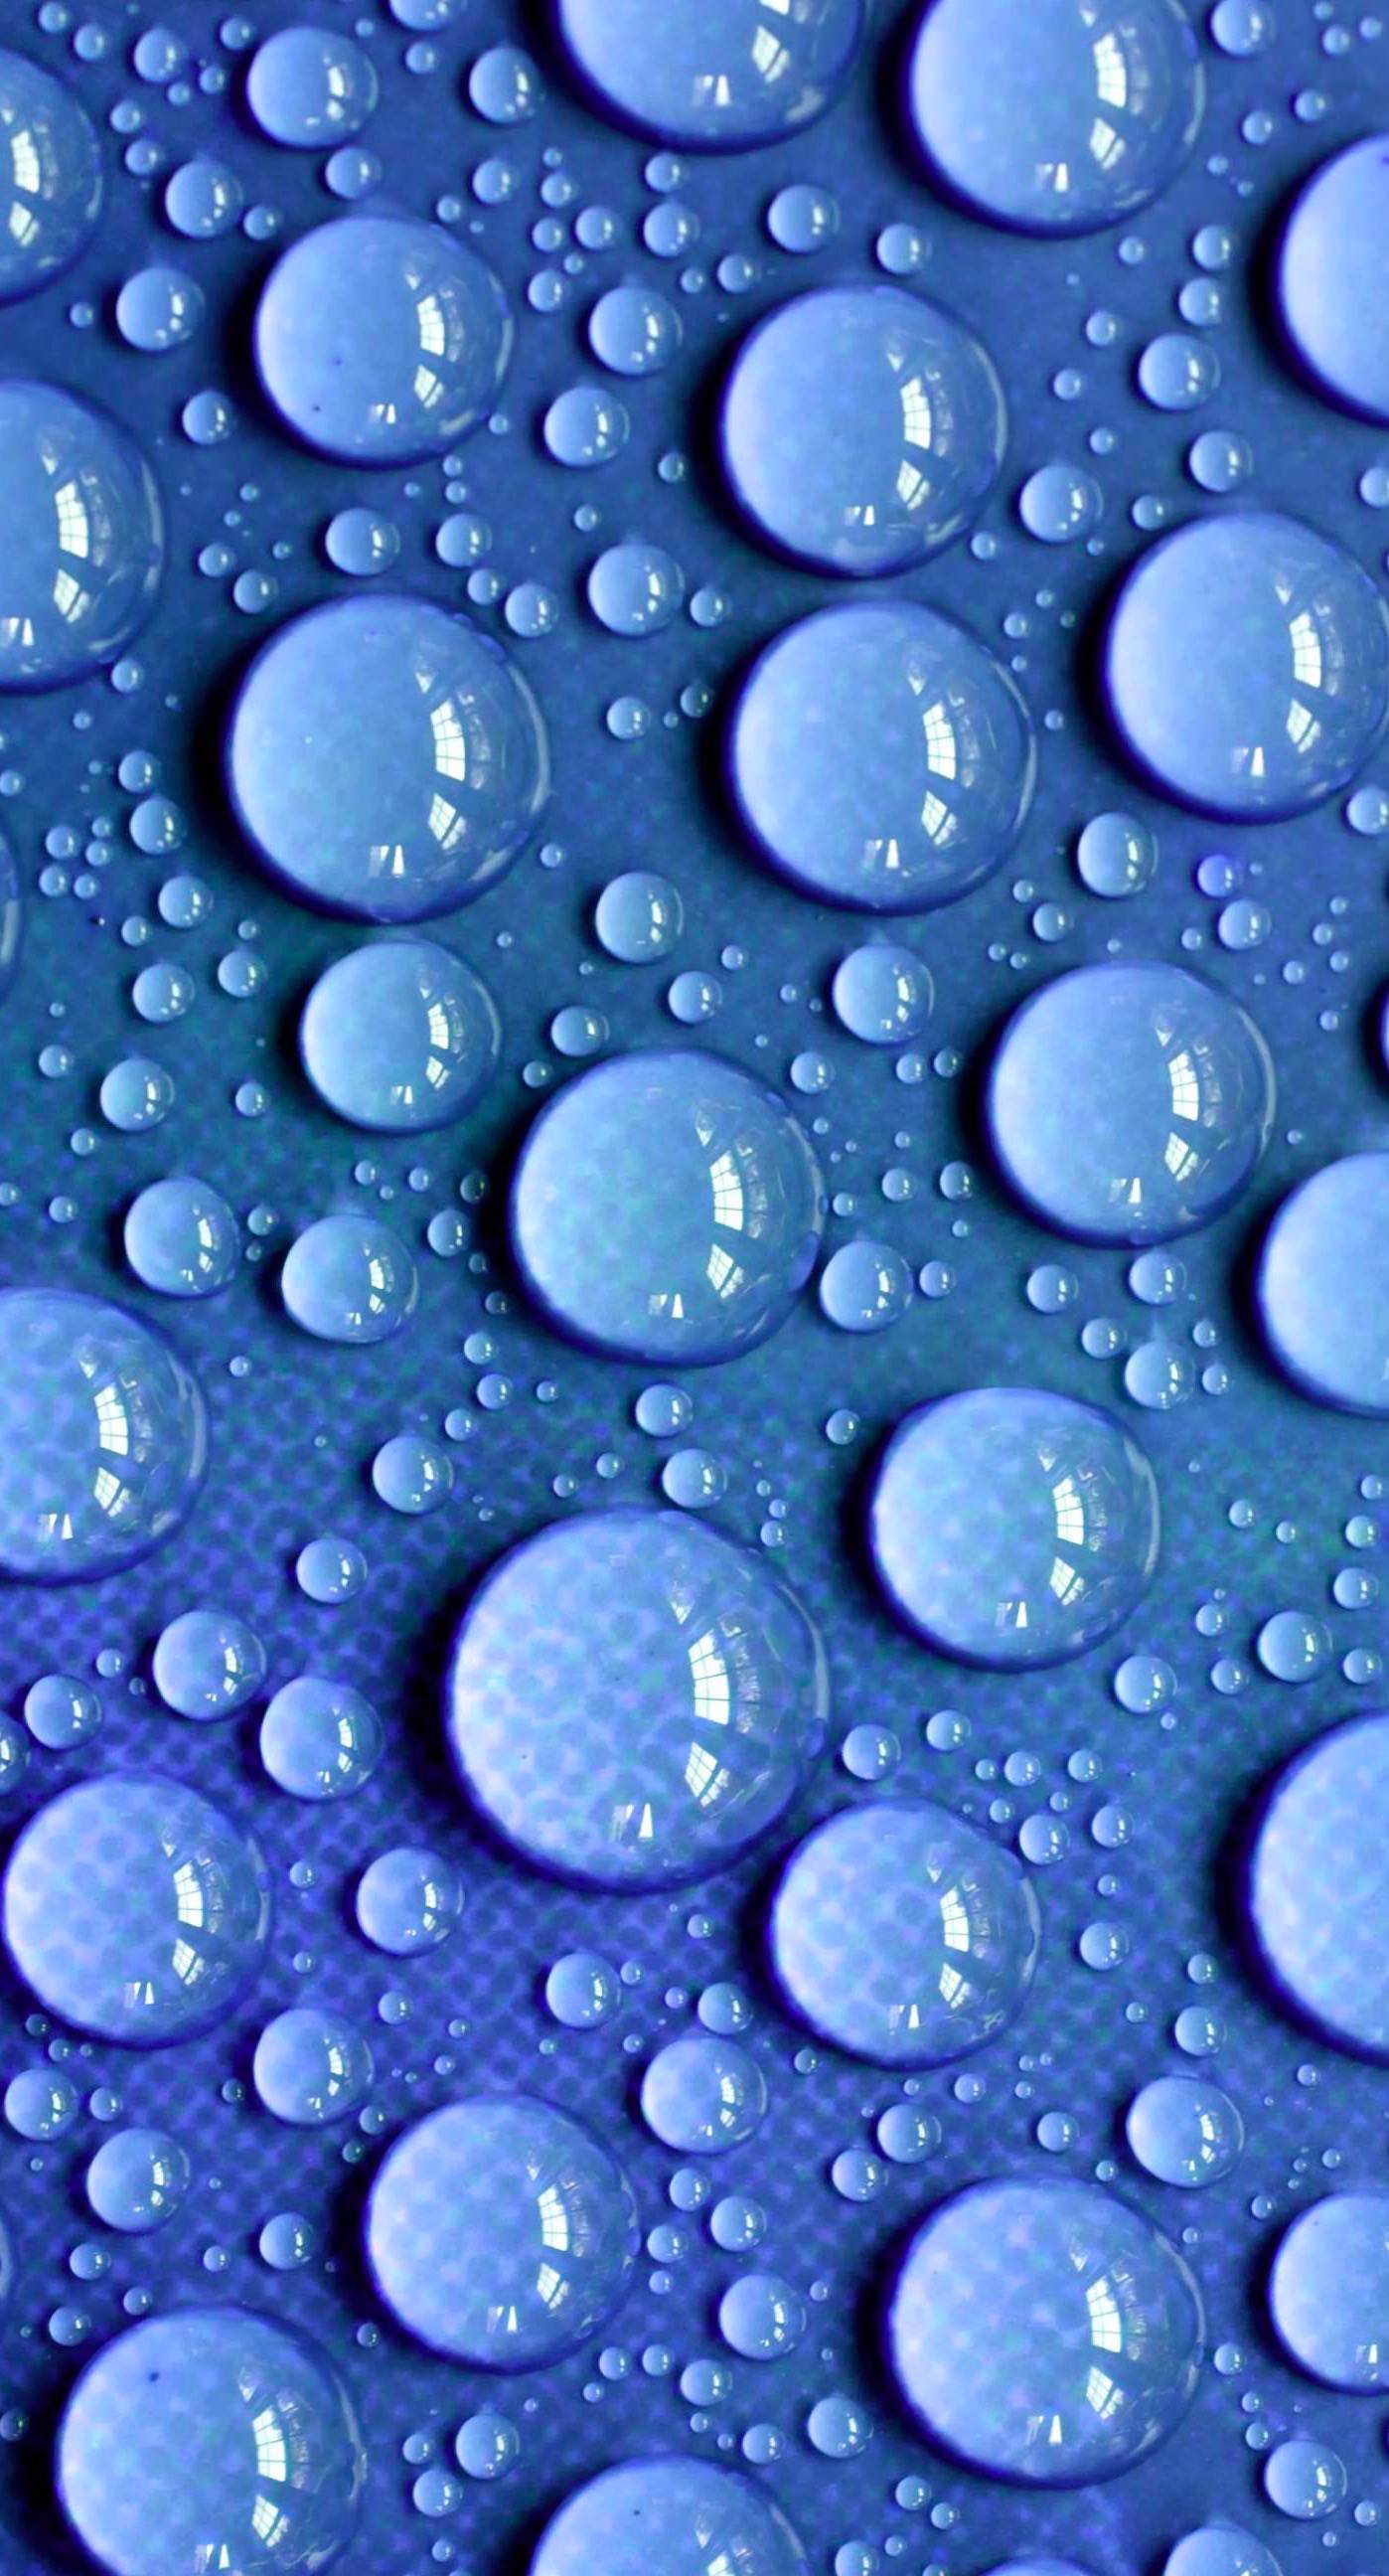 Natural Water Drops Blue Wallpapersc Iphone7plus